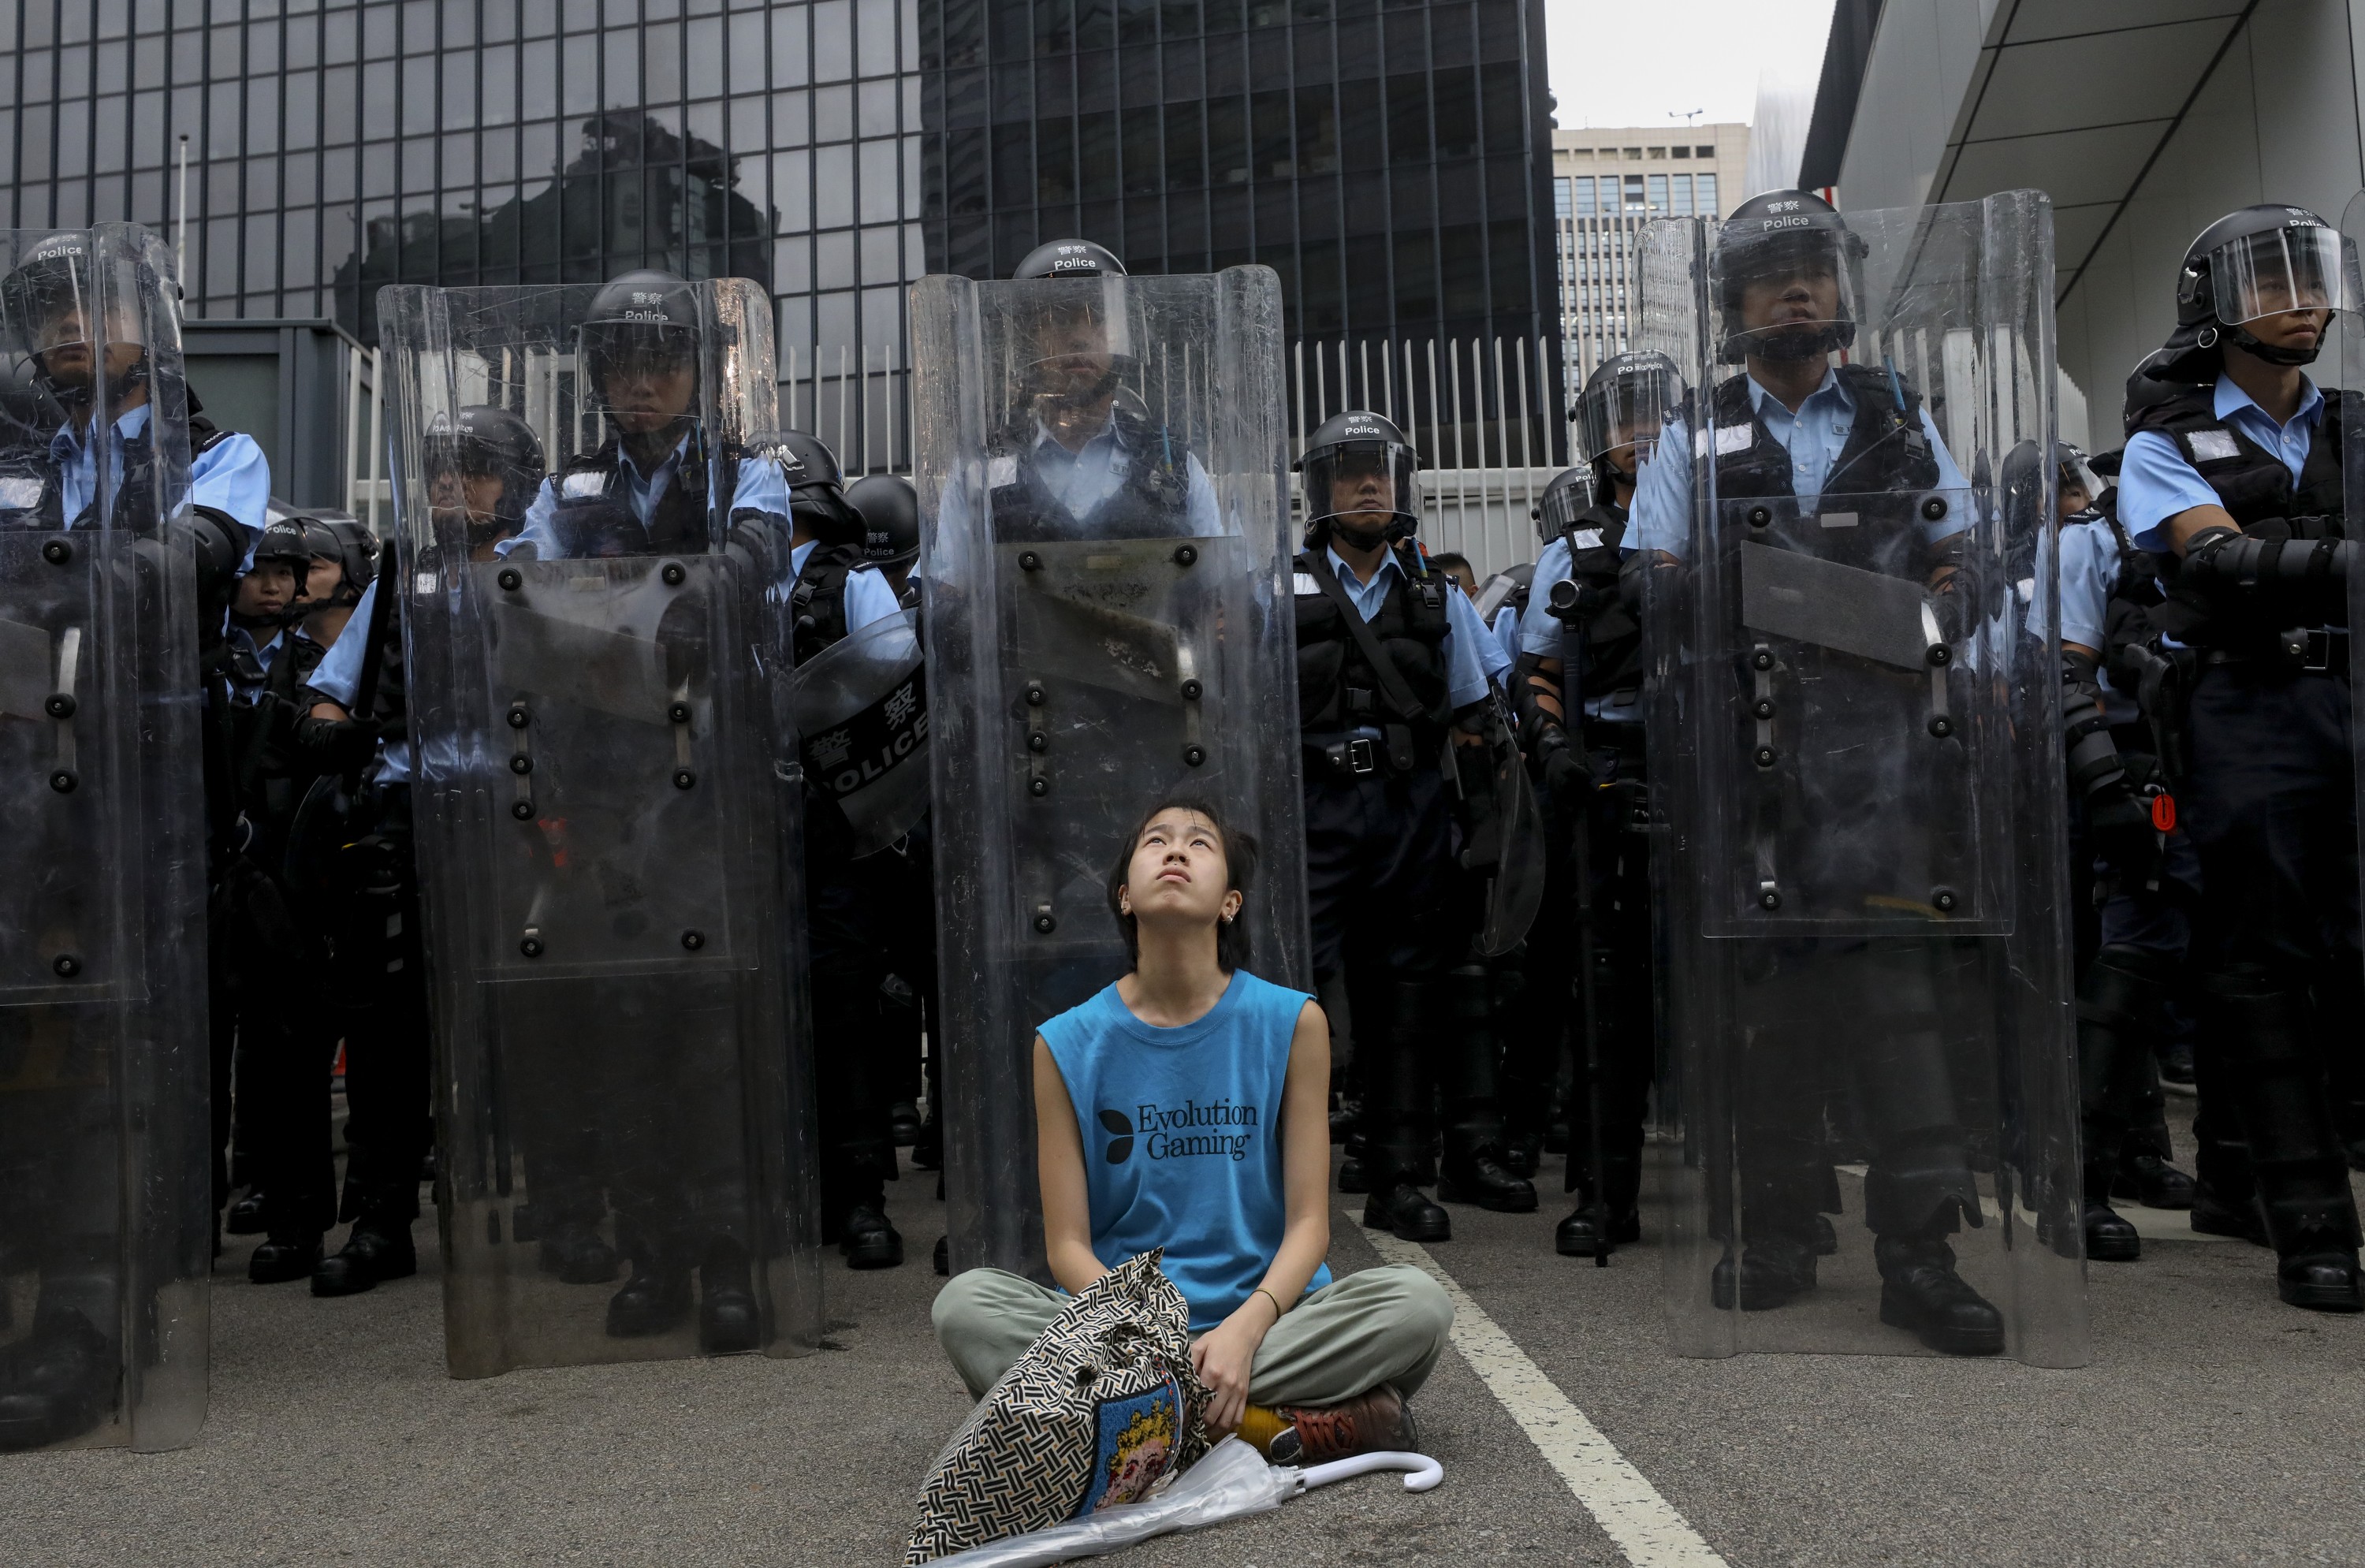 A demonstrator refuses to budge during Wednesday’s extradition law protest. Photo: Dickson Lee